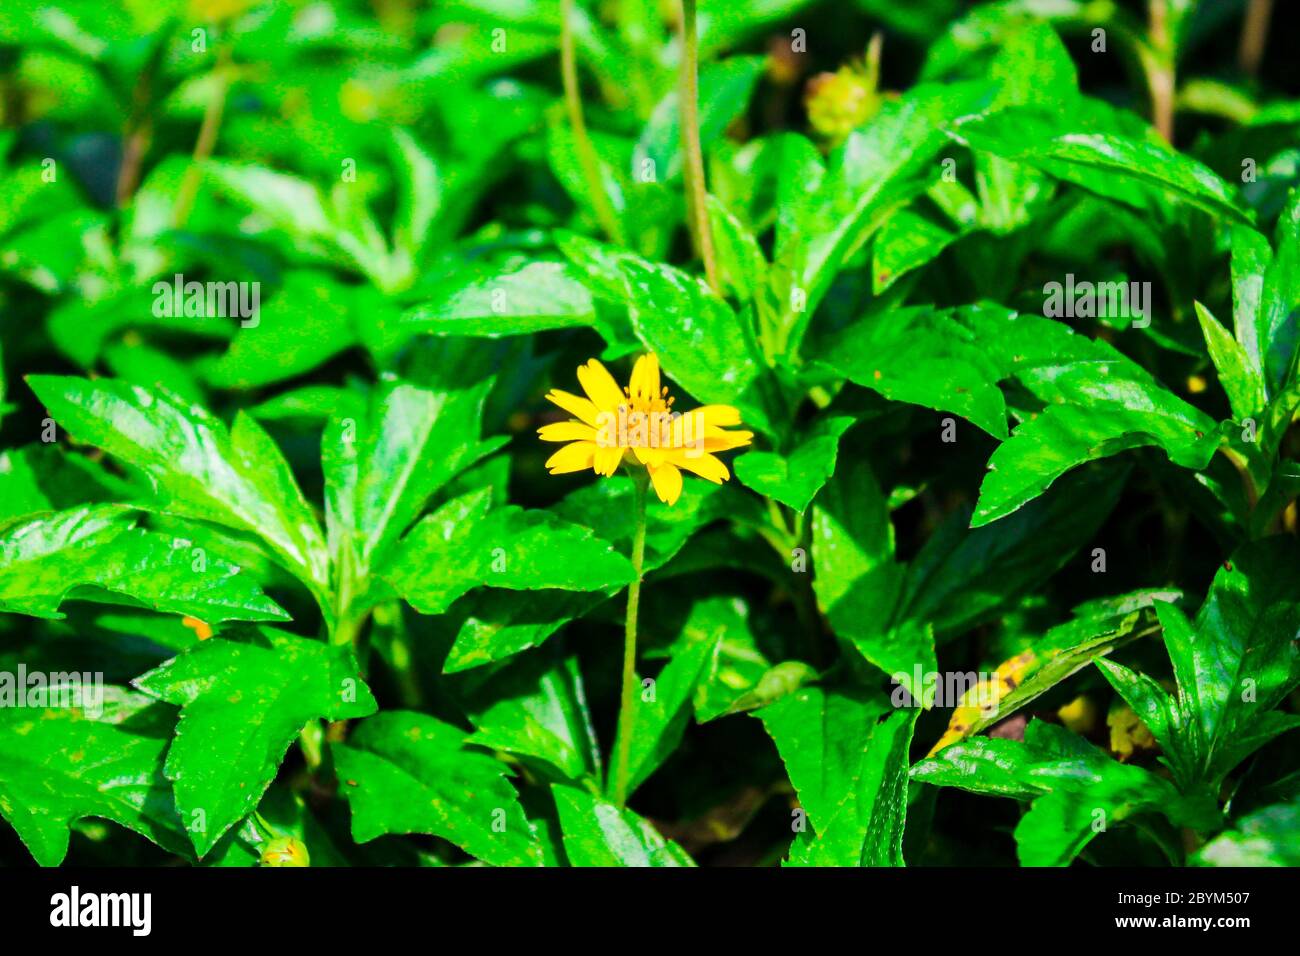 acmella oleracea. spilanthes acmella, toothache plant, paracress, fresh yellow flower wayside and green leaf Stock Photo